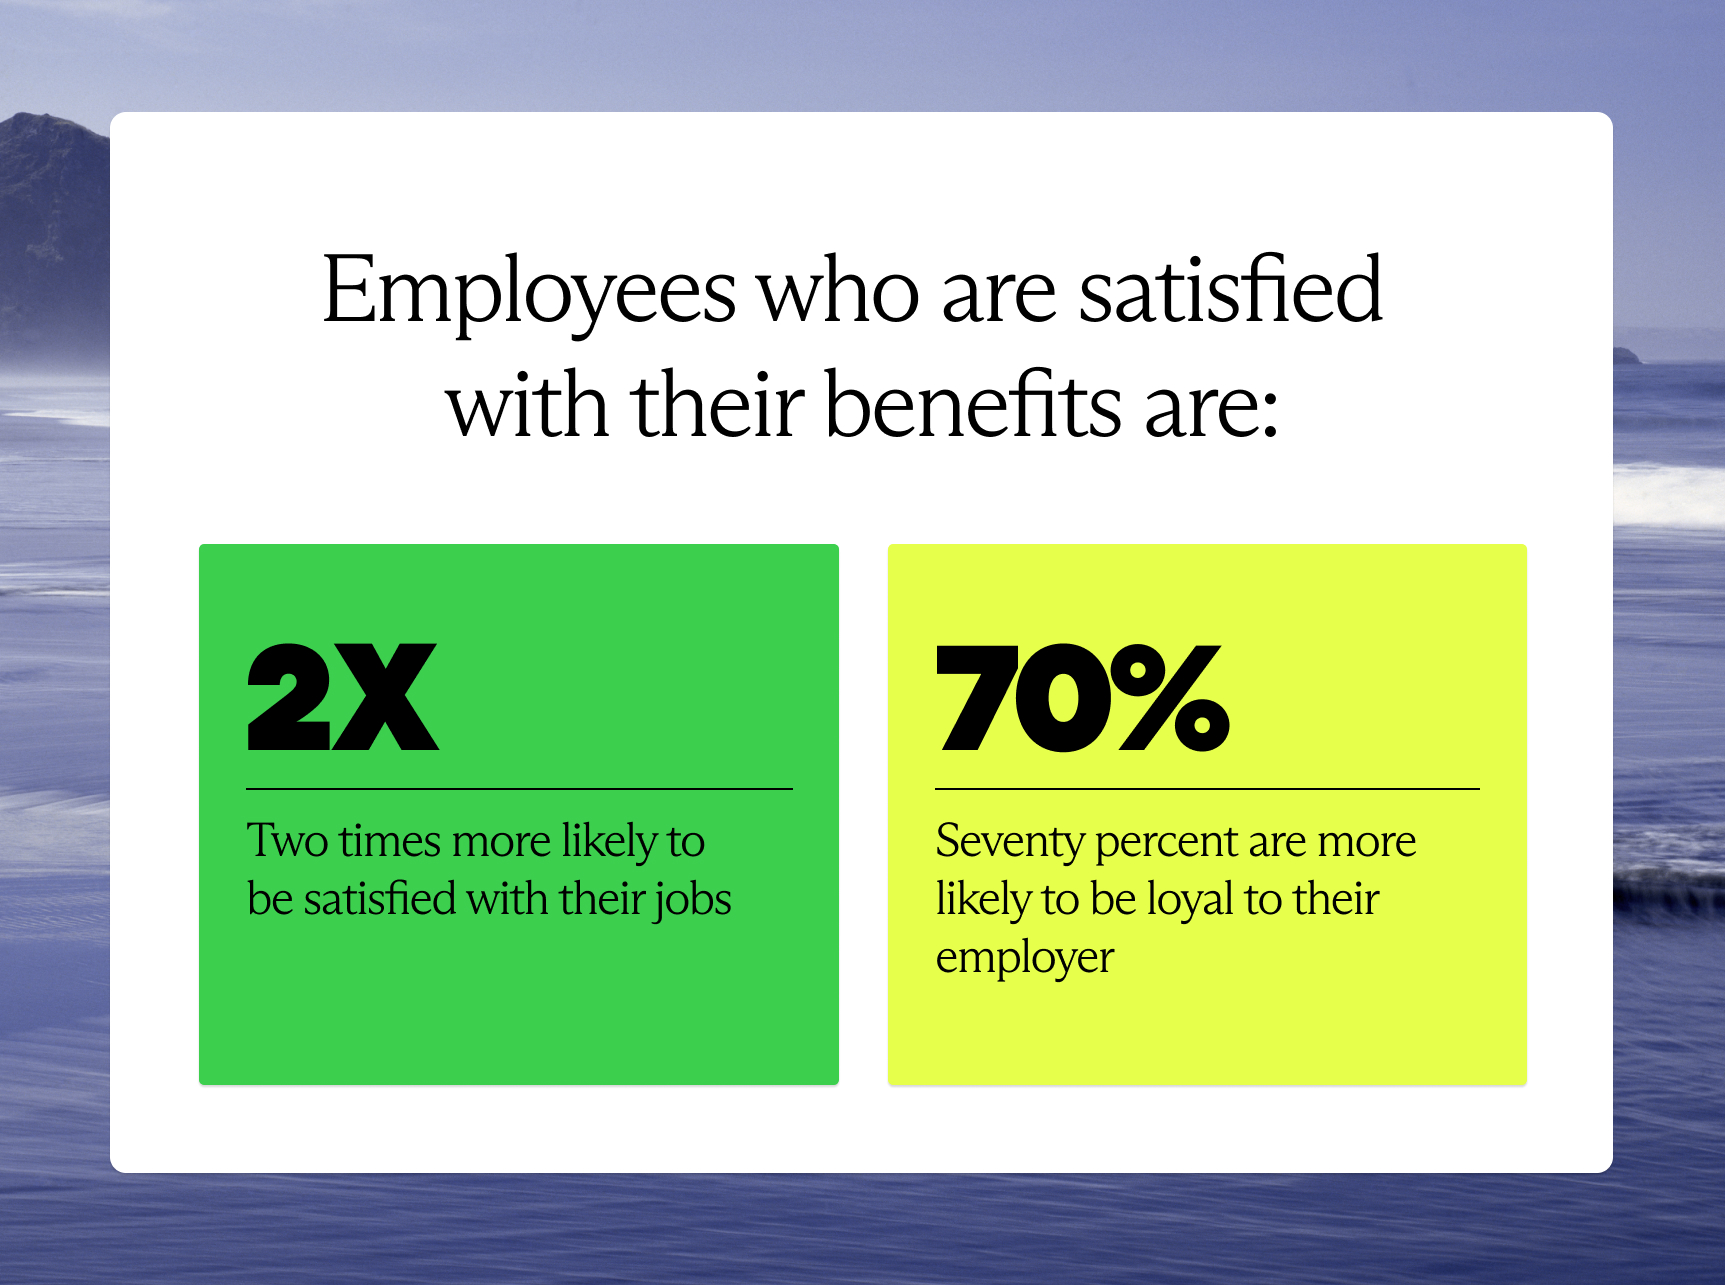 Employees who are satisfied with their benefits are 2 x more likely to be satisfied with their jobs 